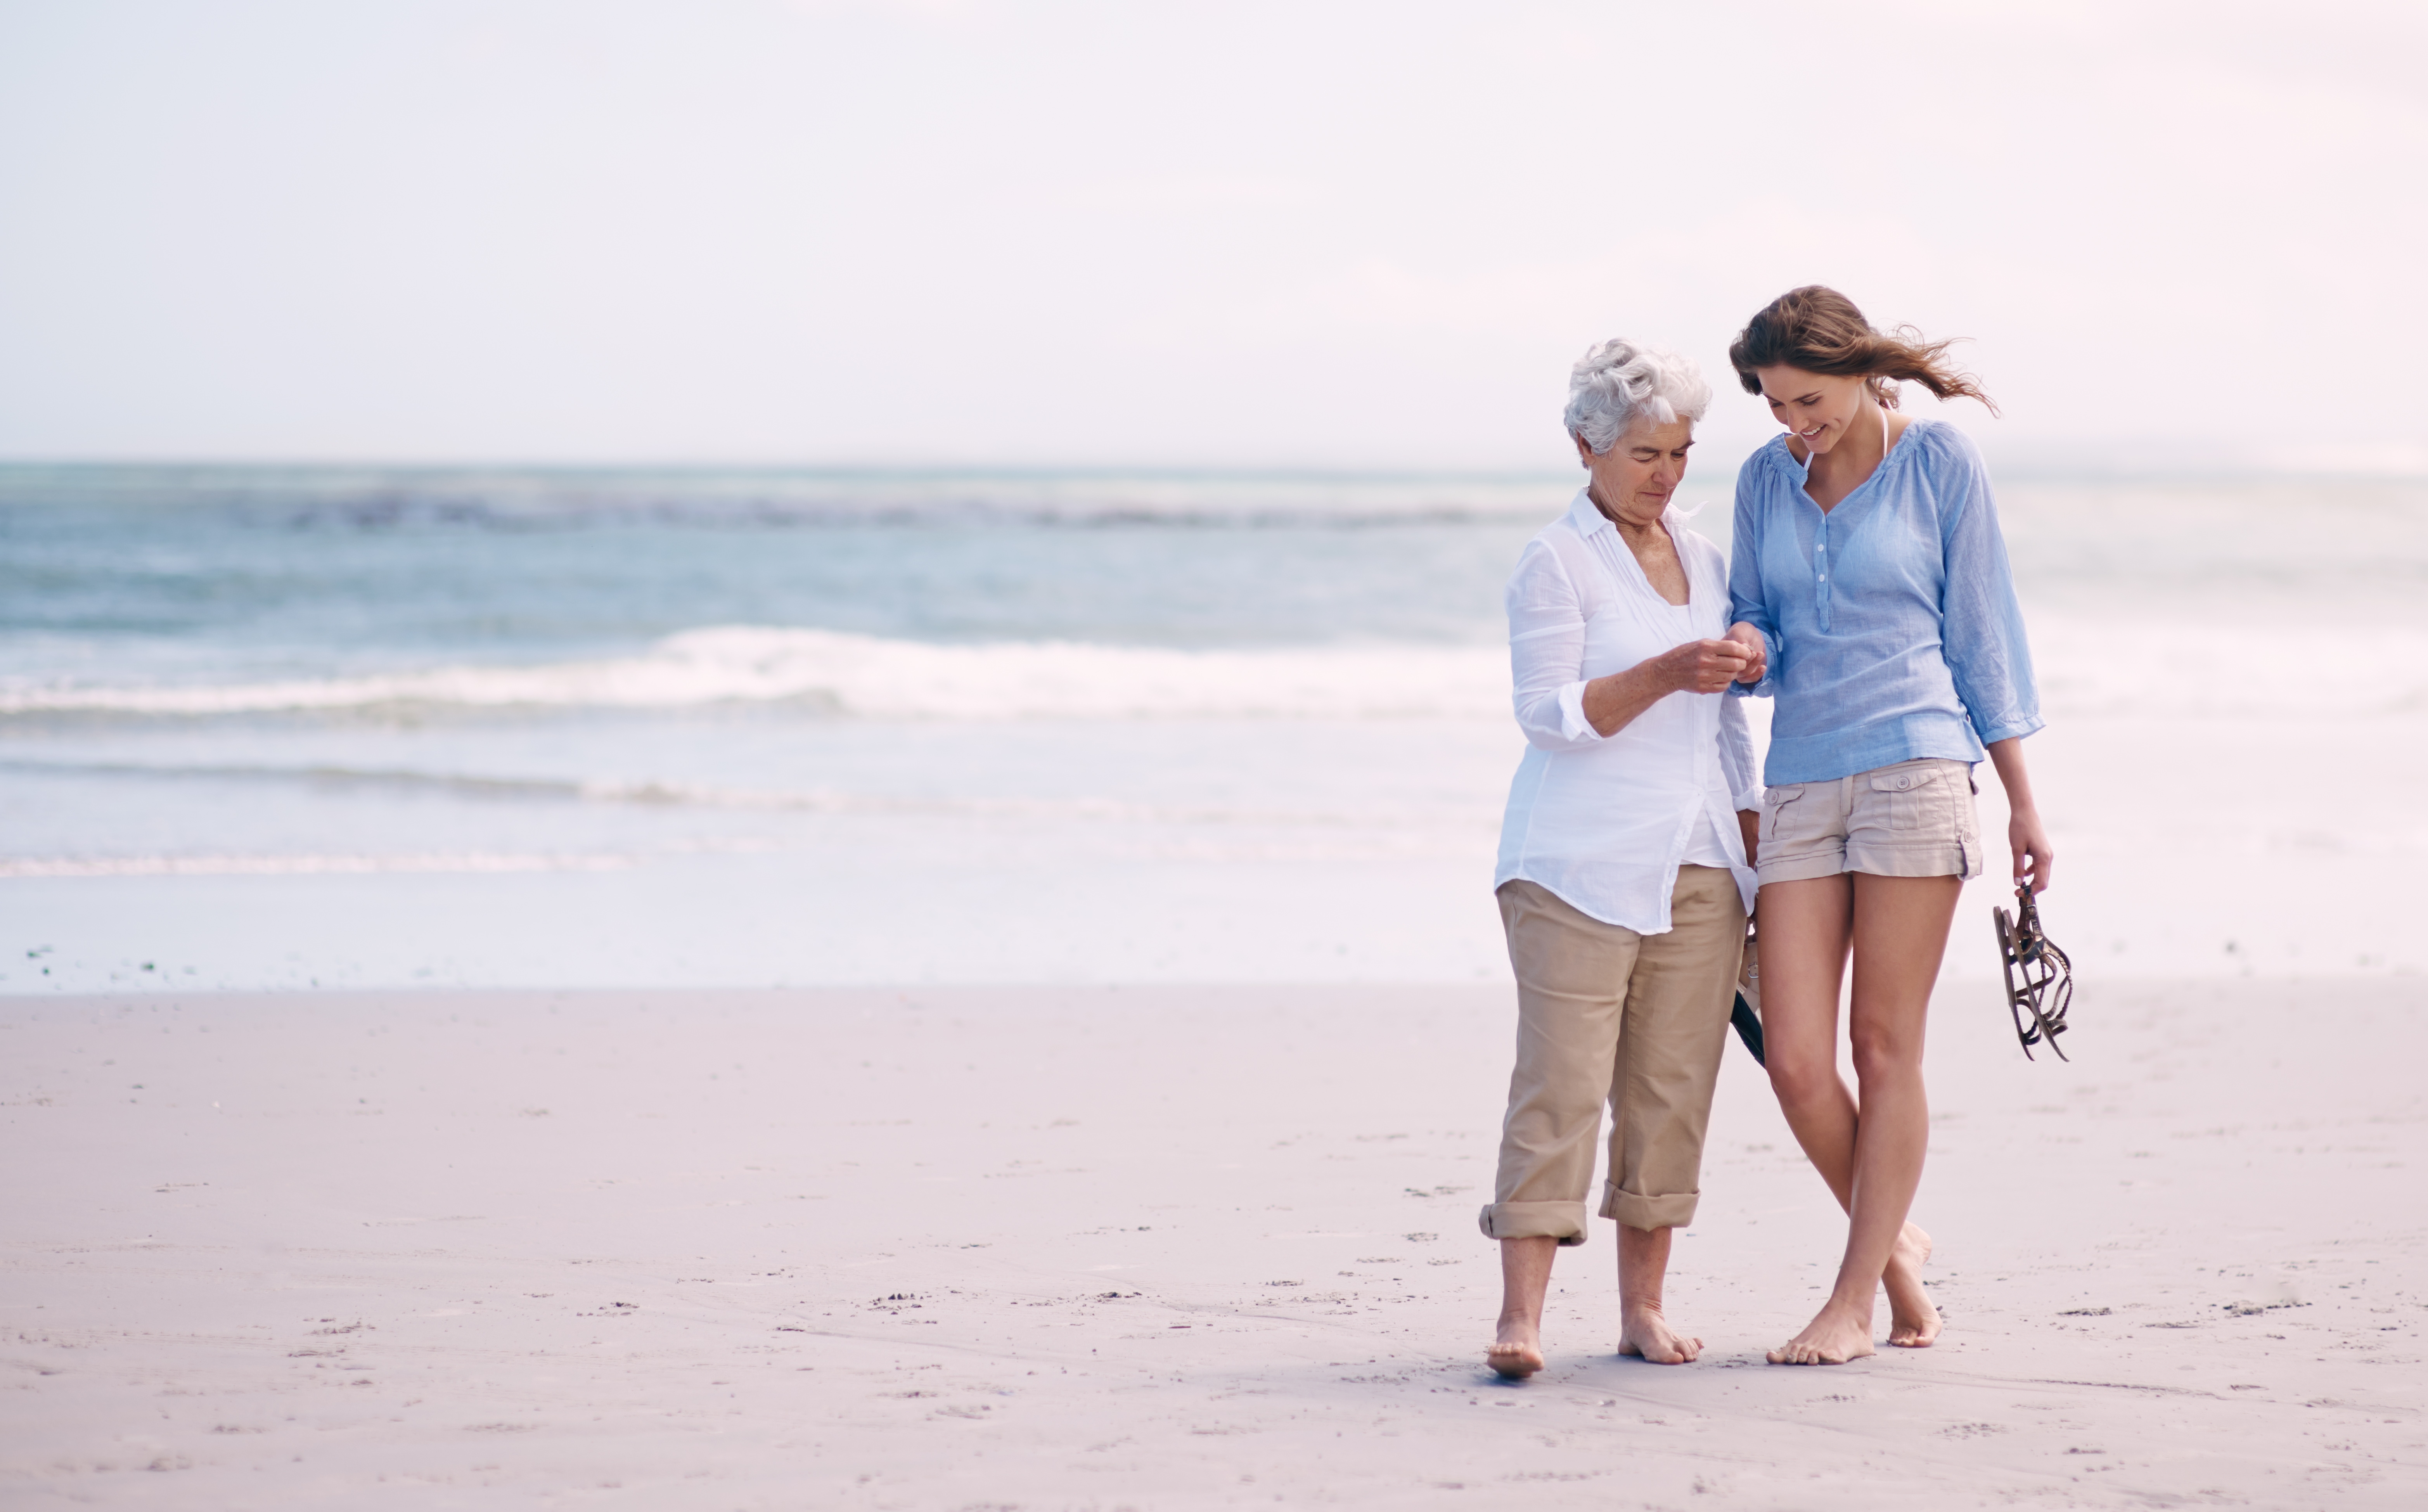 Mother and daughter spending quality time at the beach | Source: Shutterstock